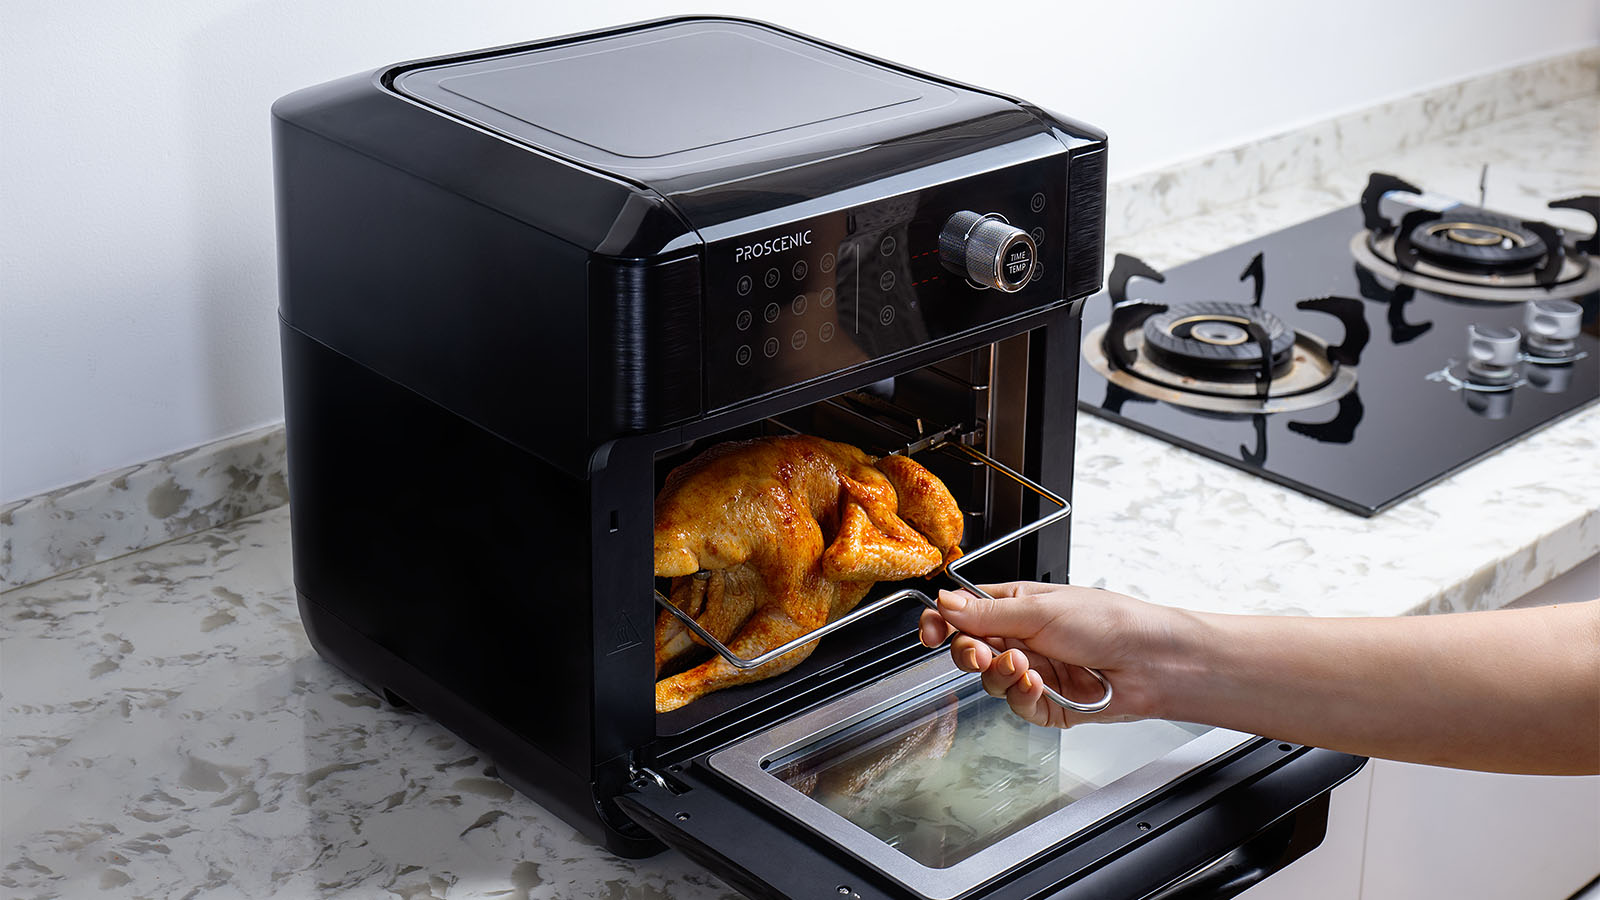 CHEFREE 6L Air Fryer - Test and Review 